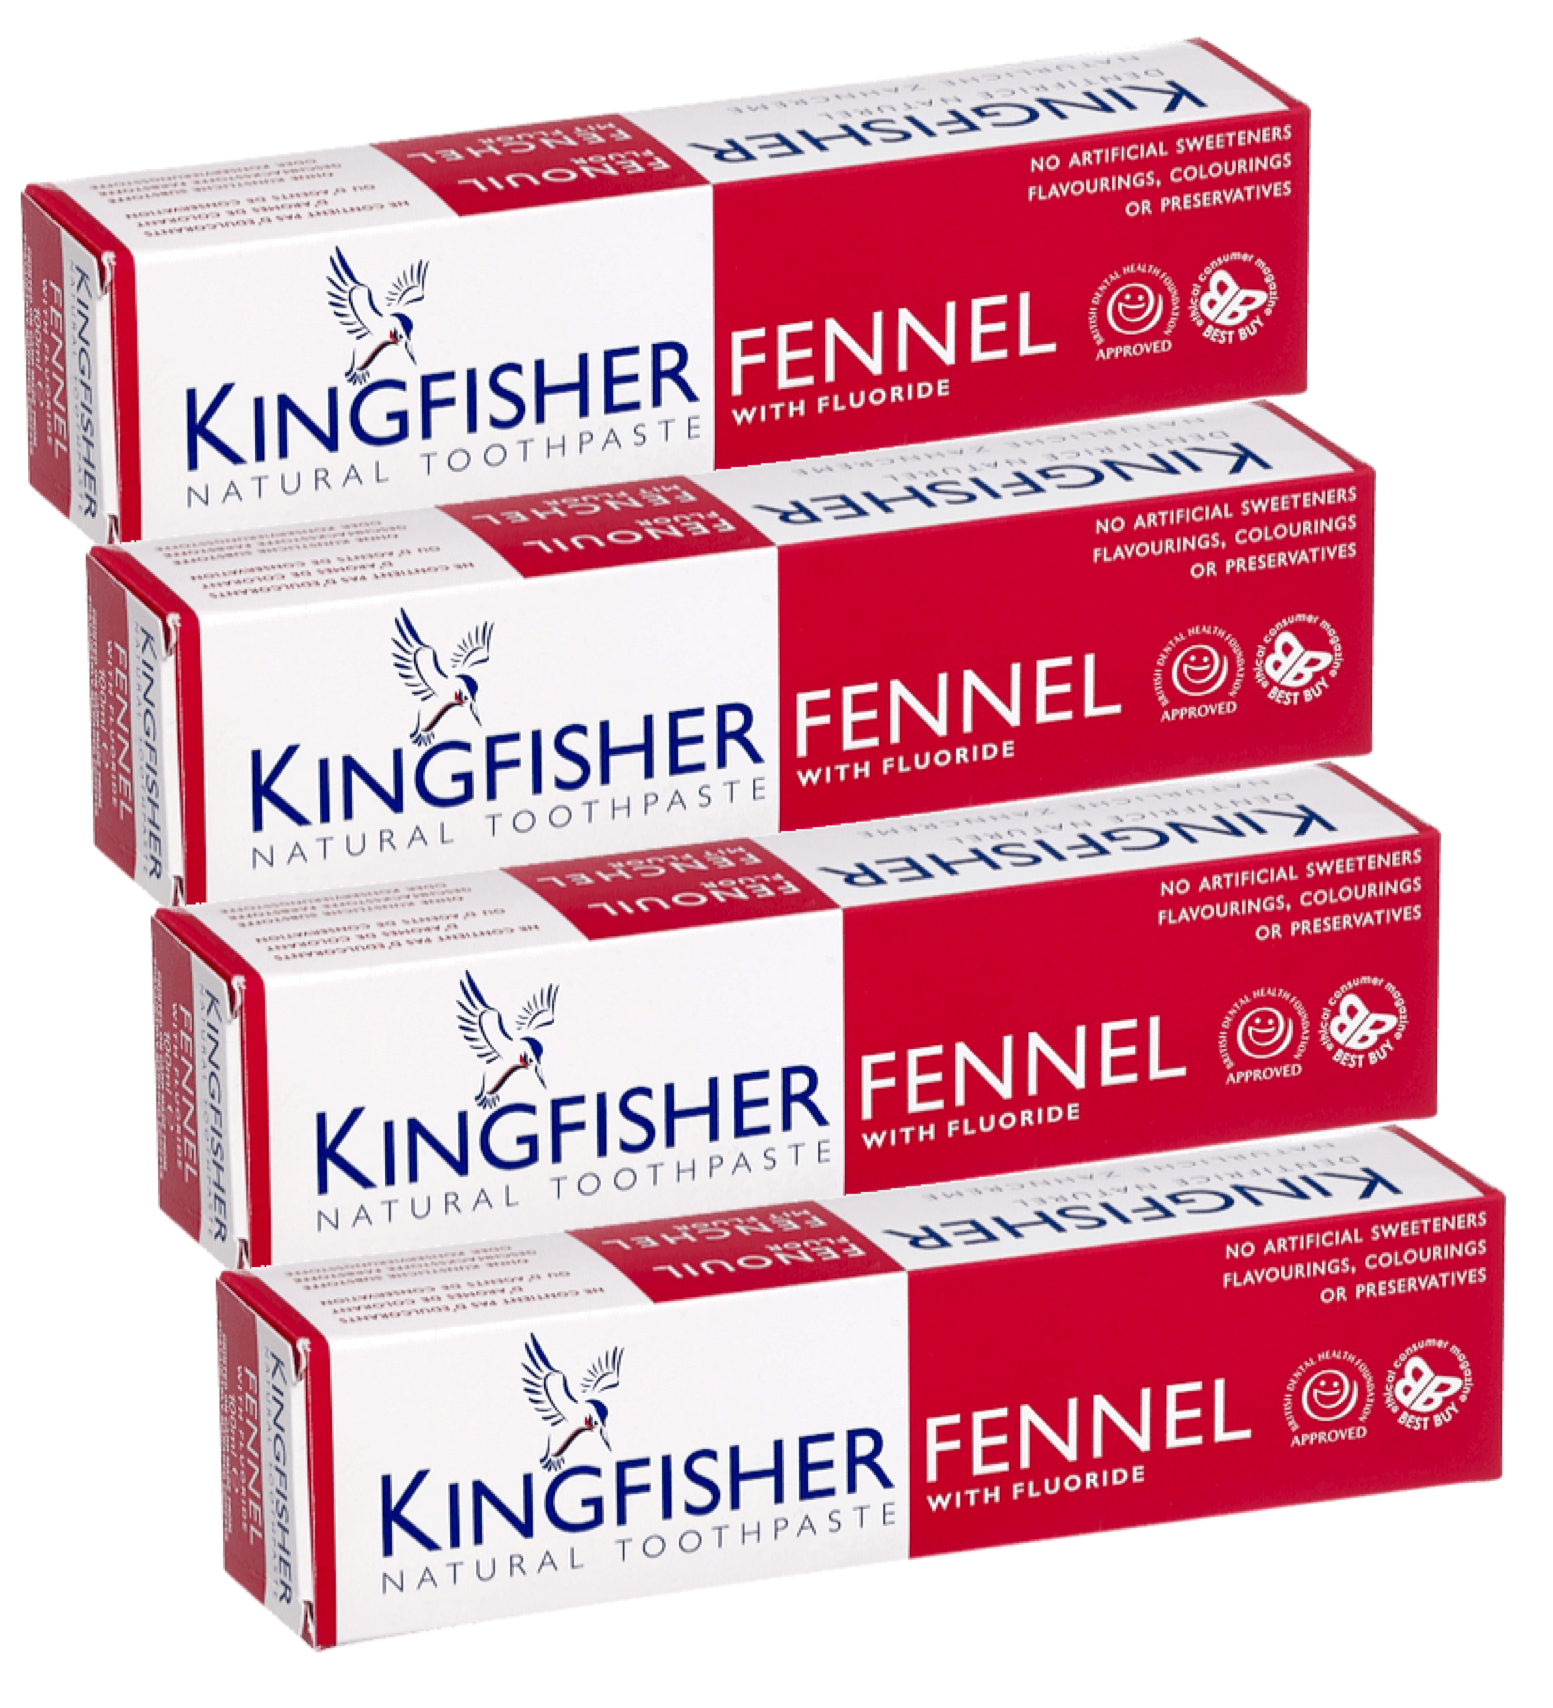 Kingfisher Toothpaste - Fennel with Fluoride Toothpaste (100ml) - Pack of 4